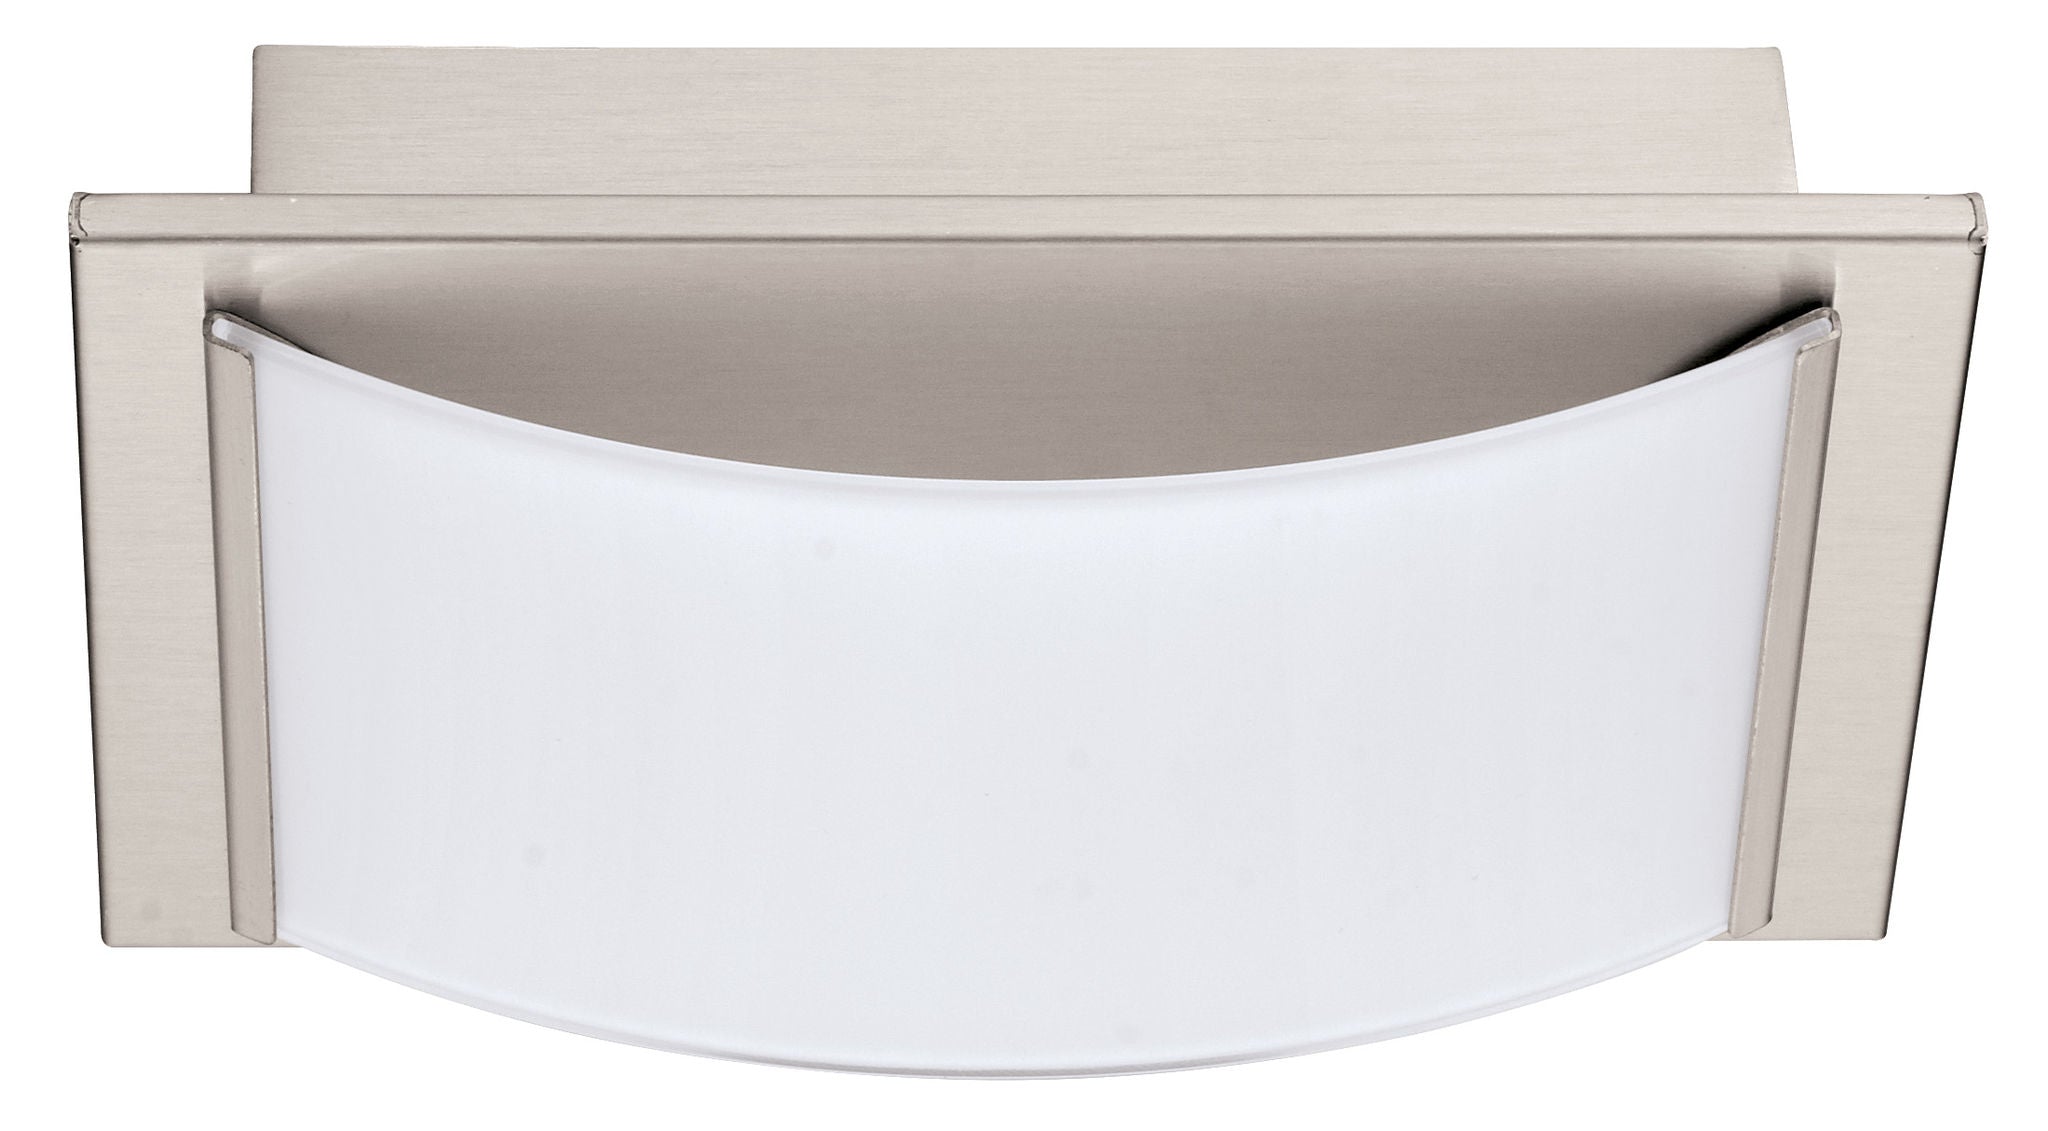 Wasao Flush mount Stainless steel INTEGRATED LED - 201467A | EGLO